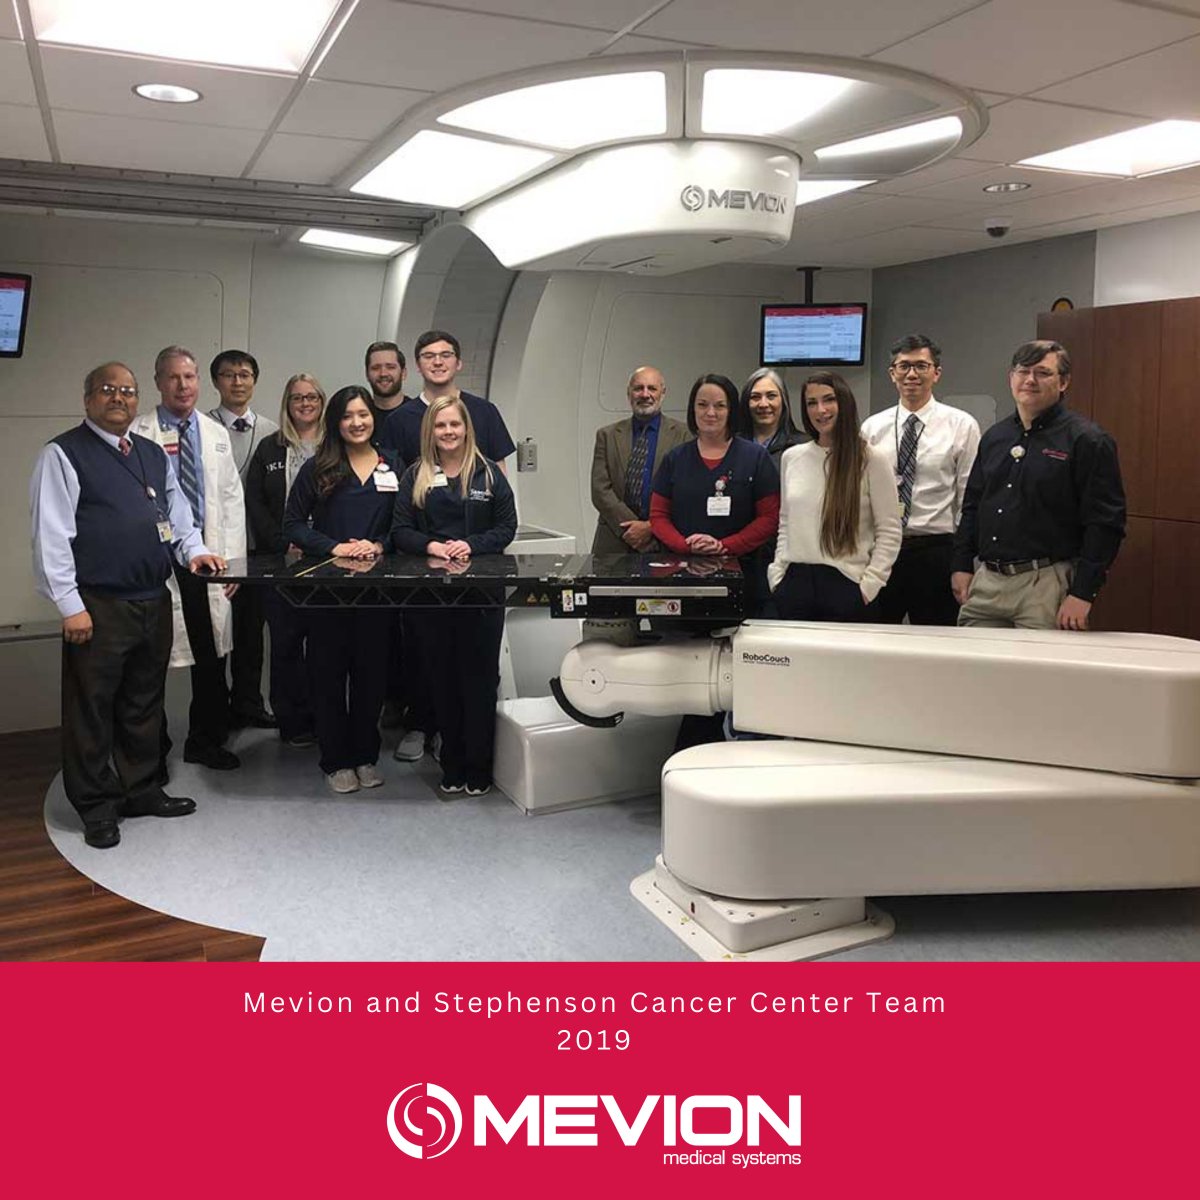 Five years ago this month, @stephensonCC @OUHealth treated their 1st patient on the MEVION S250i. 🎉 We extend our warmest congratulations to everyone involved in this incredible achievement! #ProtonTherapy #IMPT #MedPhys #RadOnc #CancerTreatment #Mevion